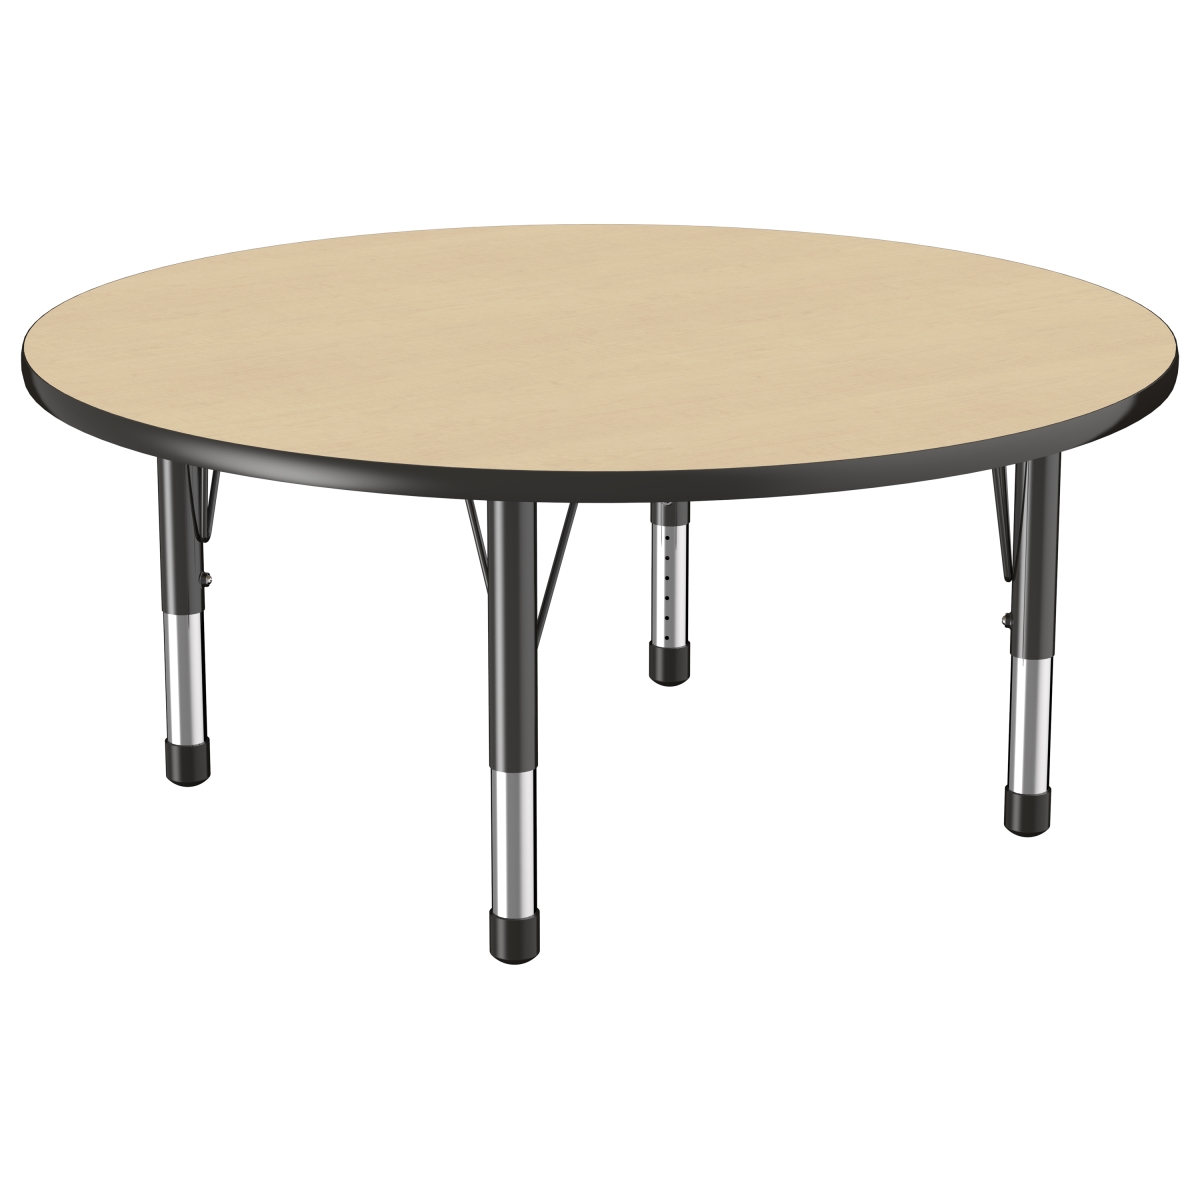 10045-mpbk 48 In. Round T-mold Adjustable Activity Table With Chunky Leg - Maple & Black